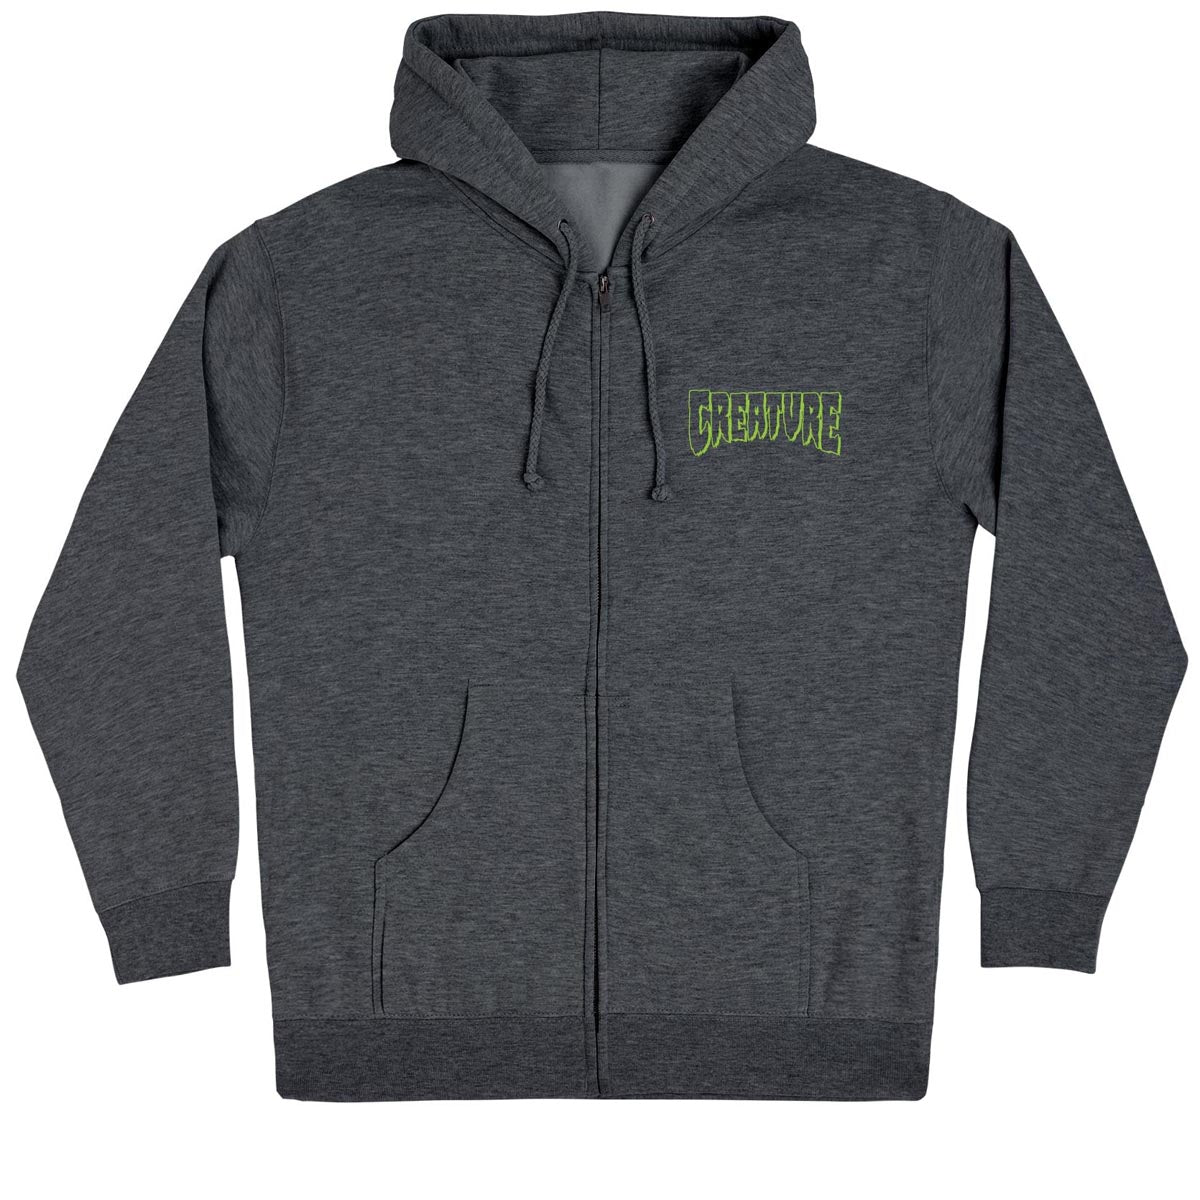 Creature Forever Undead Relic Zip Up Hoodie - Charcoal Heather image 2